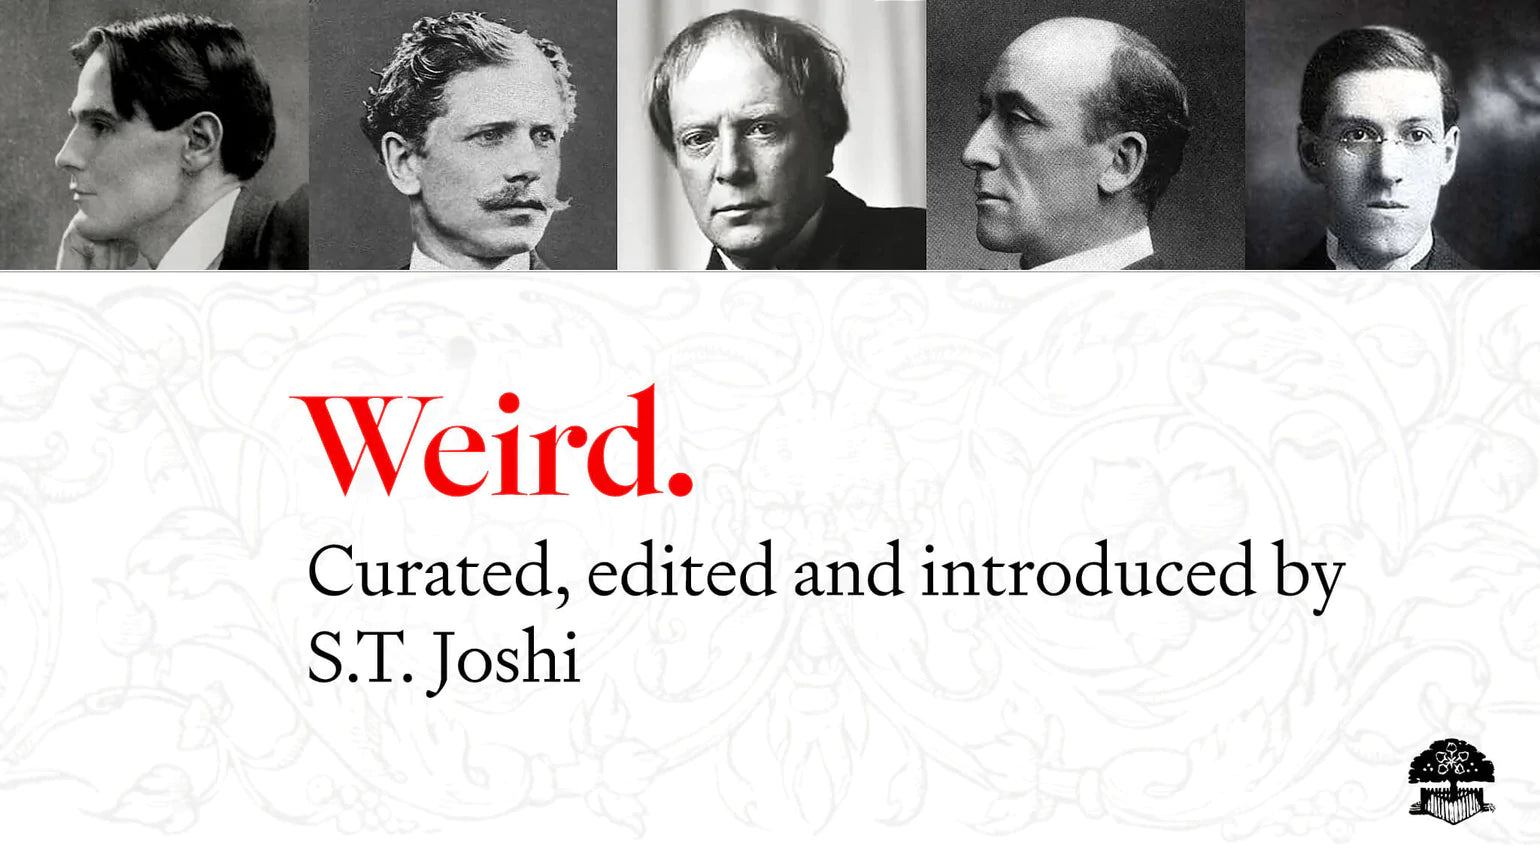 Weird. - curated, edited and introduced by S.T. Joshi